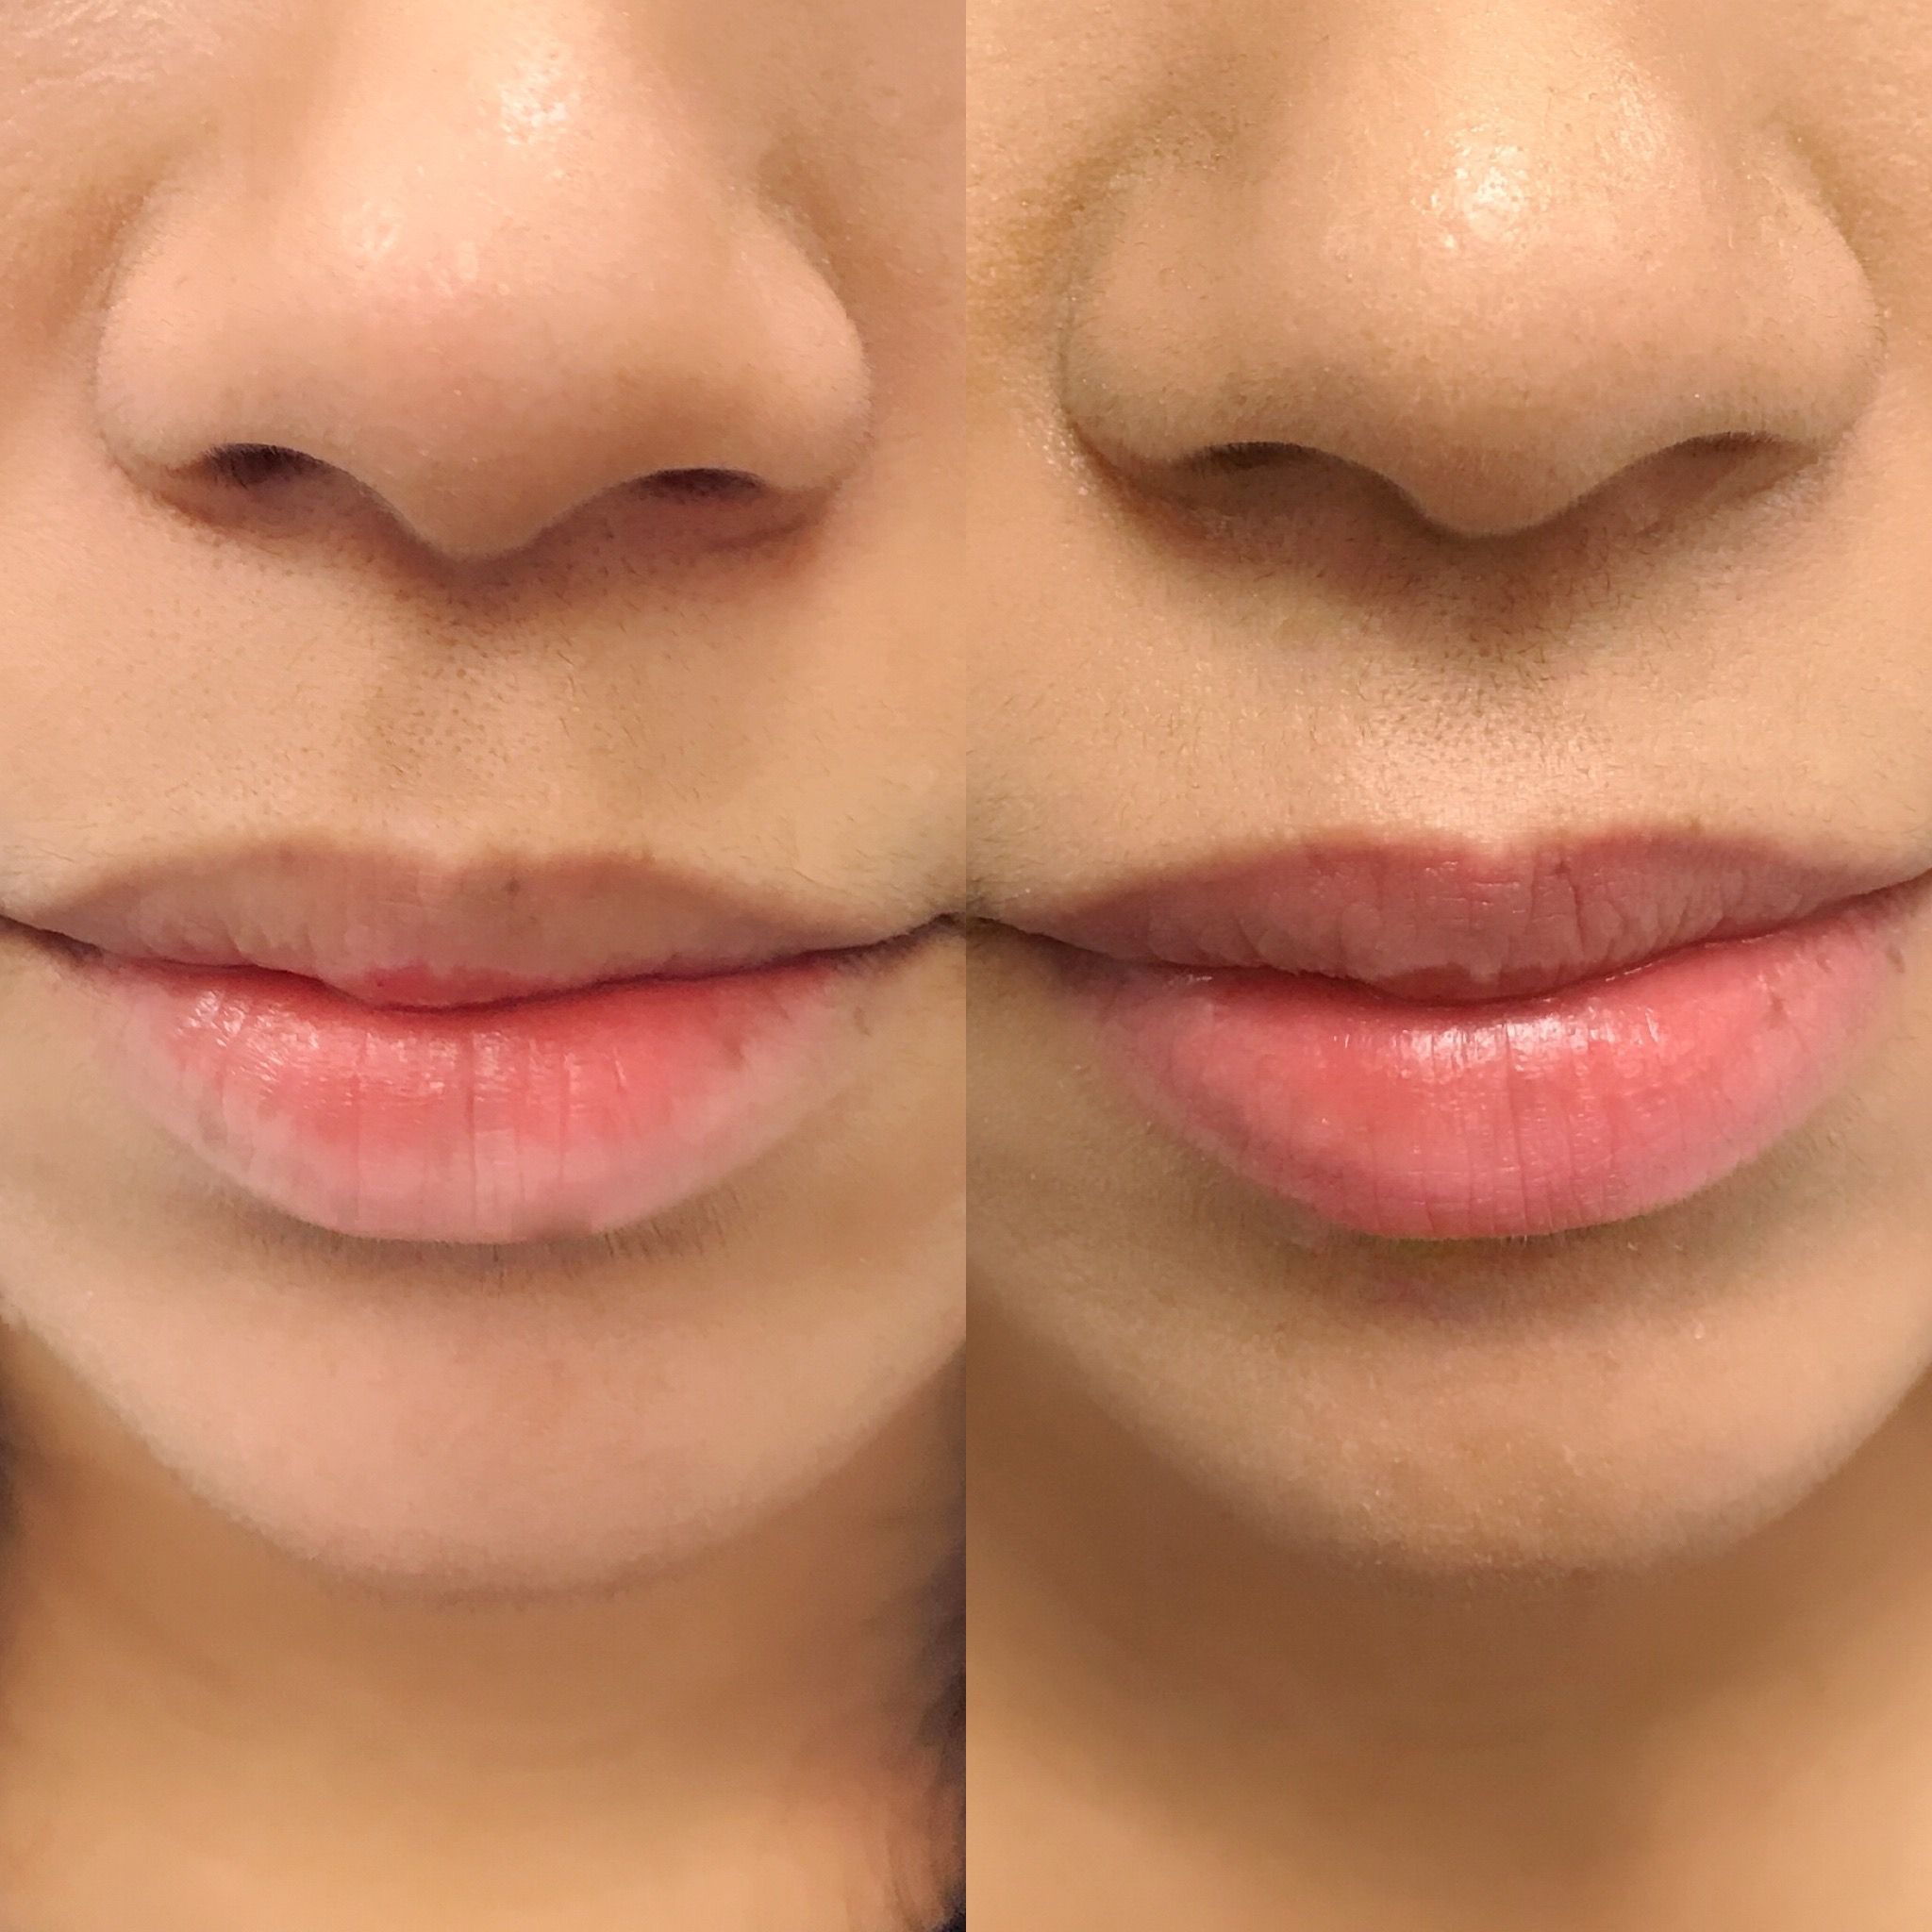 Lip Blushing Is the Cosmetic Procedure You Didnt Know You Wanted